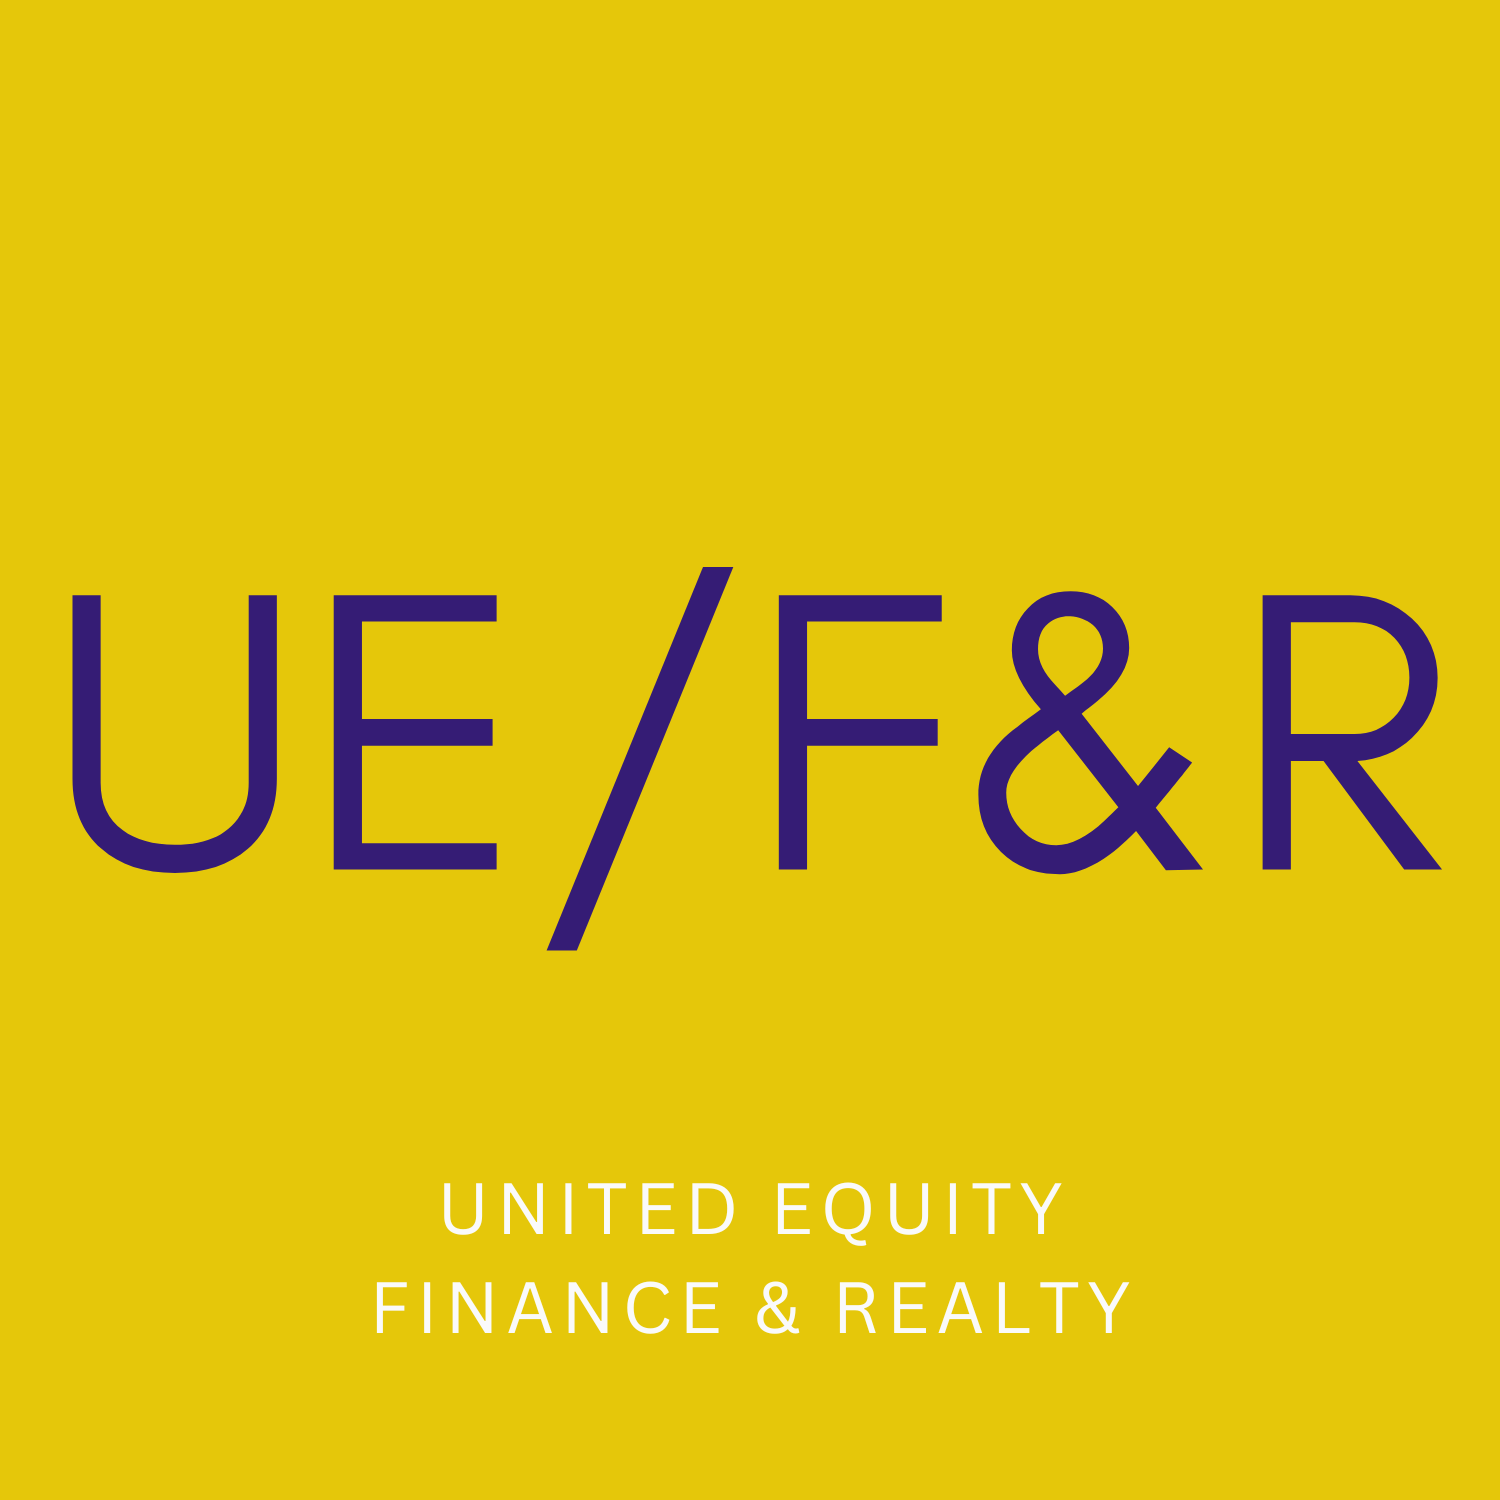 united equity finance & Realty Logo (1500 × 1500 px)